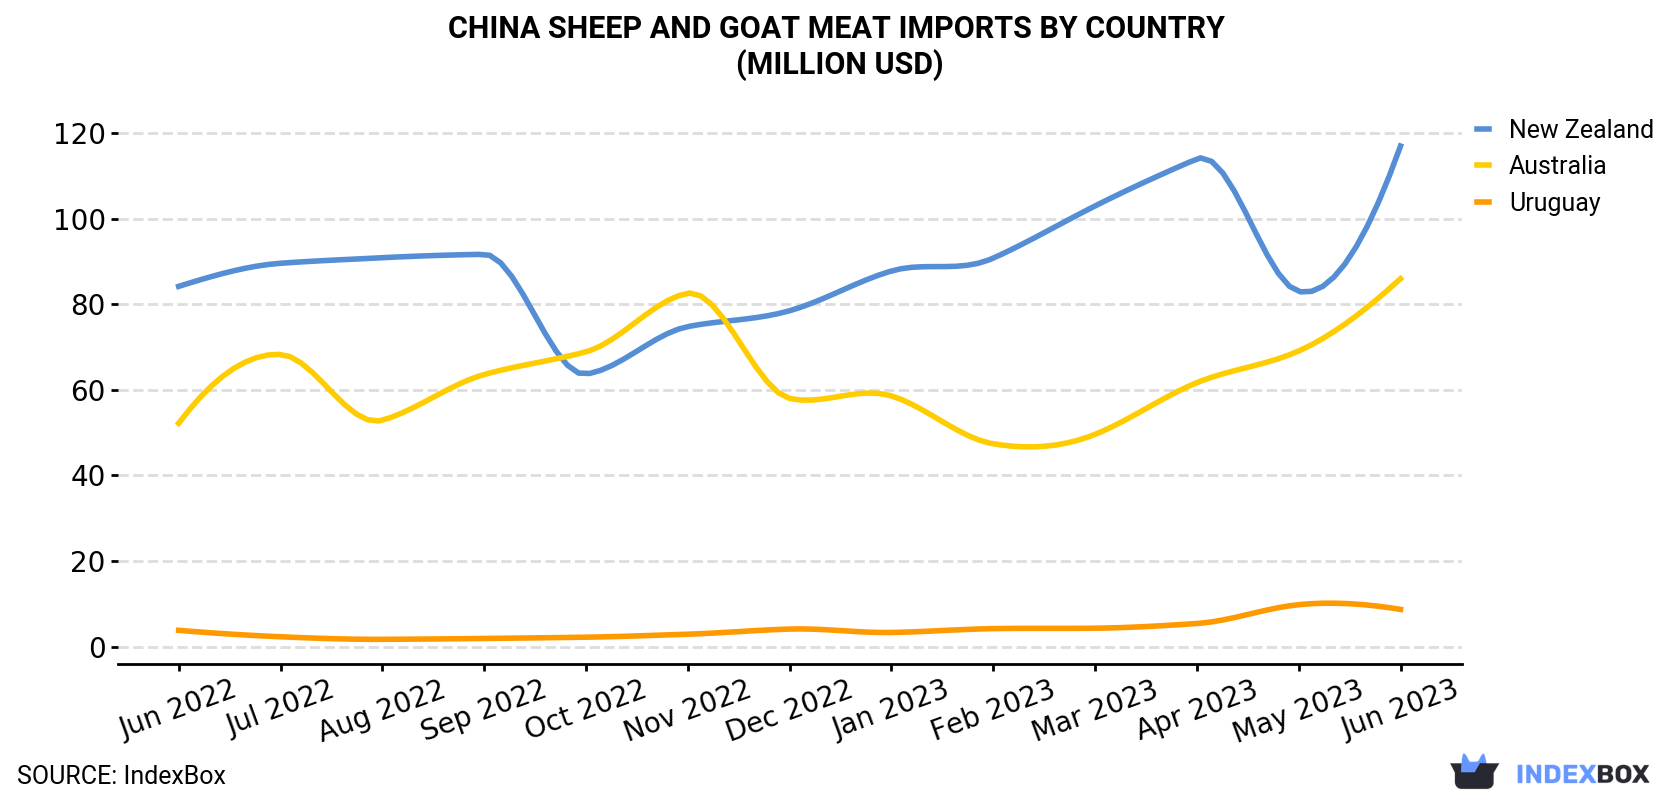 China Sheep And Goat Meat Imports By Country (Million USD)